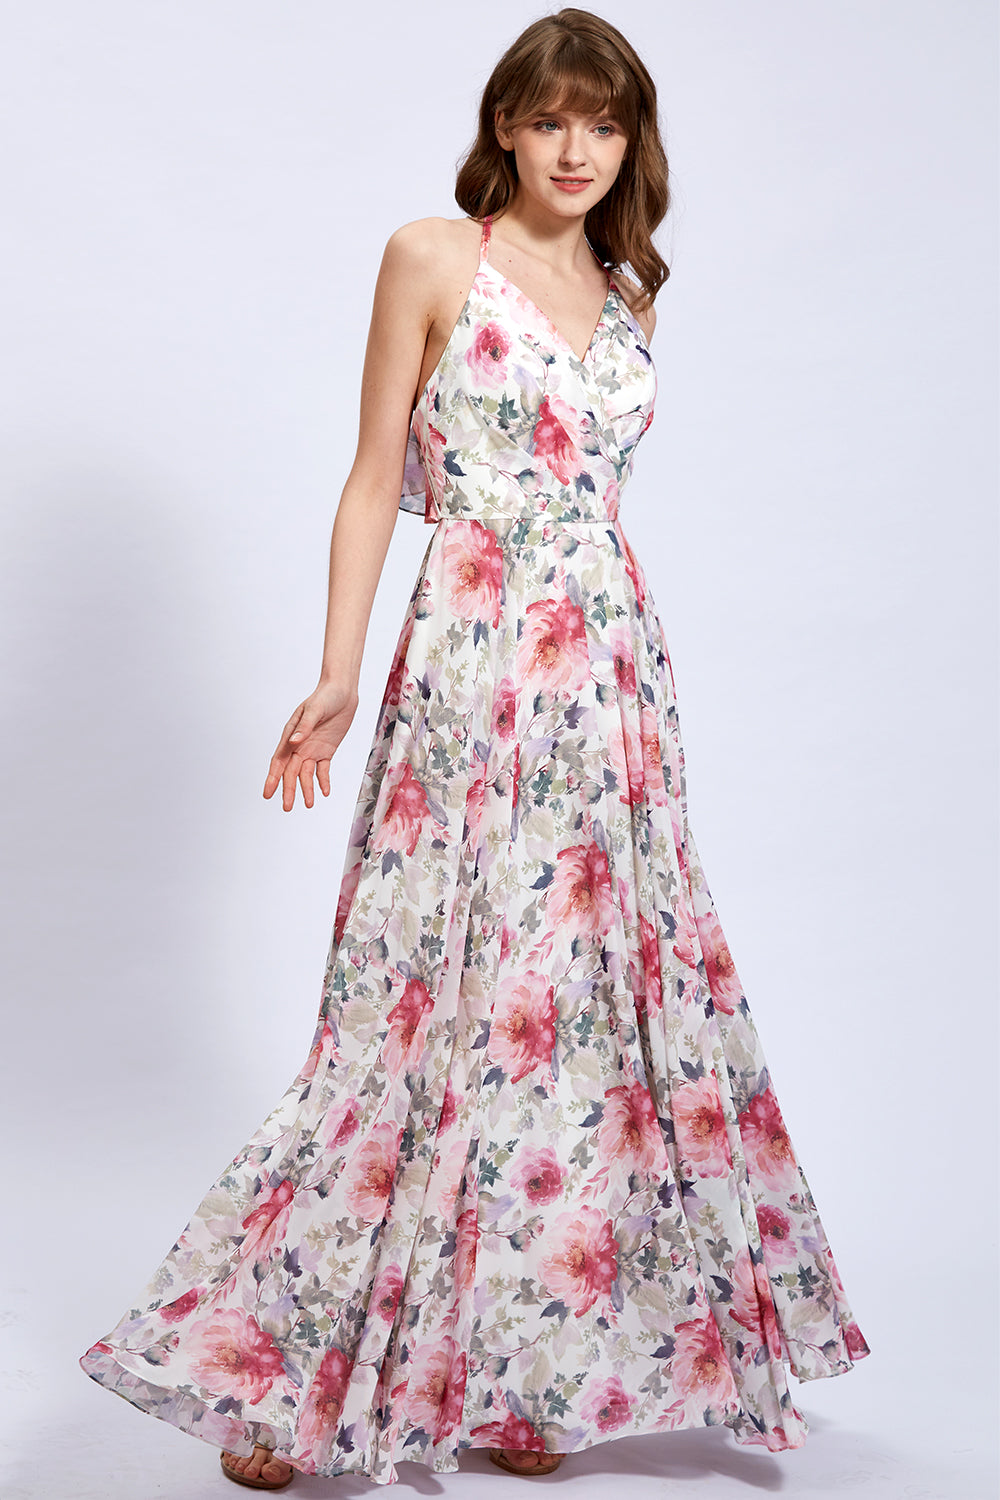 Pink Floral Dresses | Flower Dresses - Hello Molly US | Hello Molly